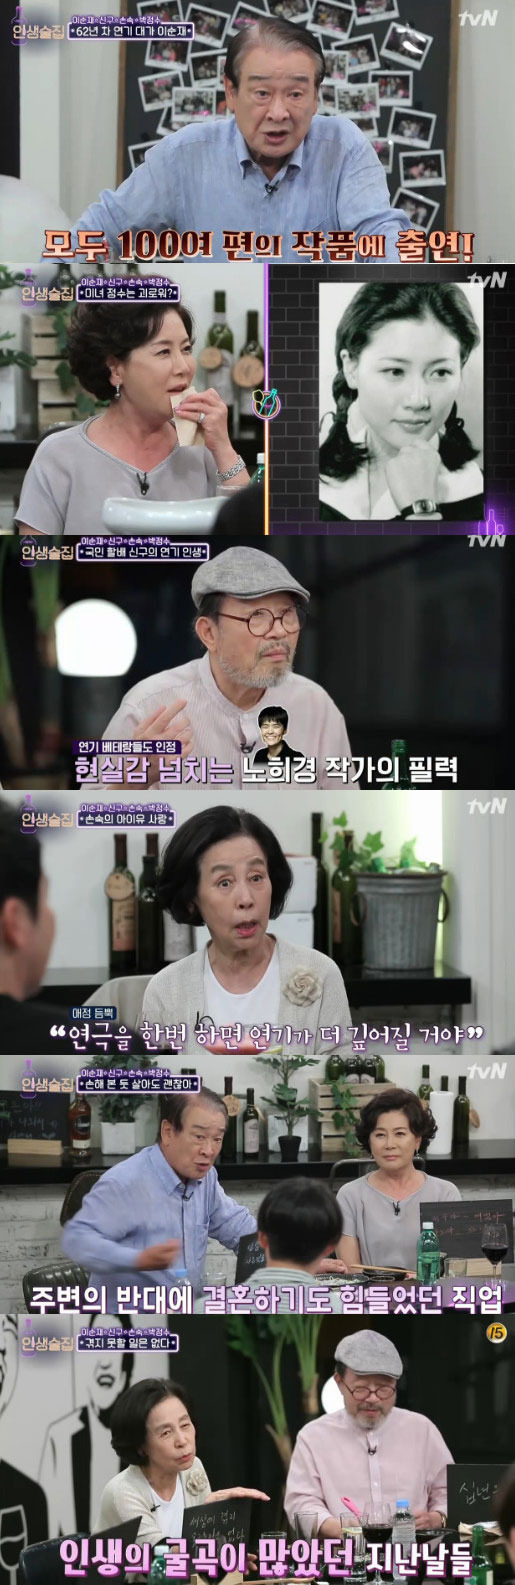 Lee Soon-jae, Shin Gu, Son Sook and Park Jung-soo appeared on TVNs Life Bar on the 13th to show off their talks.Lee Soon-jae has released a history of more than 100 films, saying that he has prolifically failed to refuse the reasons for his prolific work.In the past, movie actors said that they could not make a living by appearing on the side of the movie.Also on this day, Kim Hee-chul showed his vocalization in front of Lee Soon-jae with the words Do not ask or ask in front of Lee Soon-jae.In Kim Hee-chuls brave vocal simulation, the cast couldnt hide their laughter.Shin Gu revealed his love story with his wife. I met my wife with a younger introduction. I was a Play early age, so I had no income.I had a love affair, but it took six years. At that time, my wife wanted to continue studying design and went to study abroad.When I saw her there, I thought she had nothing to look at, he said, laughing. I think she came because she was a good man.Will you marry your wife now even if you are born again? I answered I know if I die and laughed.On this day, Son Sook revealed the story of learning sign language by Acting as Grandmas Boy of IU in My Uncle.In the play, Son Sook appeared as Gians Grandmas Boy, who had a pre-murder record, and stimulated the tear glands with a heart-wrenching act.Son Sook said, It is a good work. He said he learned sign language to digest the role.Also, about the IU, I was really hard.IU seems to have a special concentration and immersion, he said. It seems that I am sitting in a grandmas boy when I see the making of a house. I wish I could play it, he said. I think it would be much more active after playing it. I want to be with you if I have a good work.Park Jung-soo has released a story about appearing as a cameo in the final episode of Life on Mars, which Jung Kyung-ho played.My son Jung Kyung-ho said, Its my last mother, but I want you to do one God, and I decided to appear at my sons request, she said.When asked whether he would give an Acting Advisor to Jung Kyung-ho, he said, I praise him, but I will not point out even the seniors who are Acting.Also on this day, the photos of Park Jung-soo, who is full of pure innocence, were released and caught the attention.